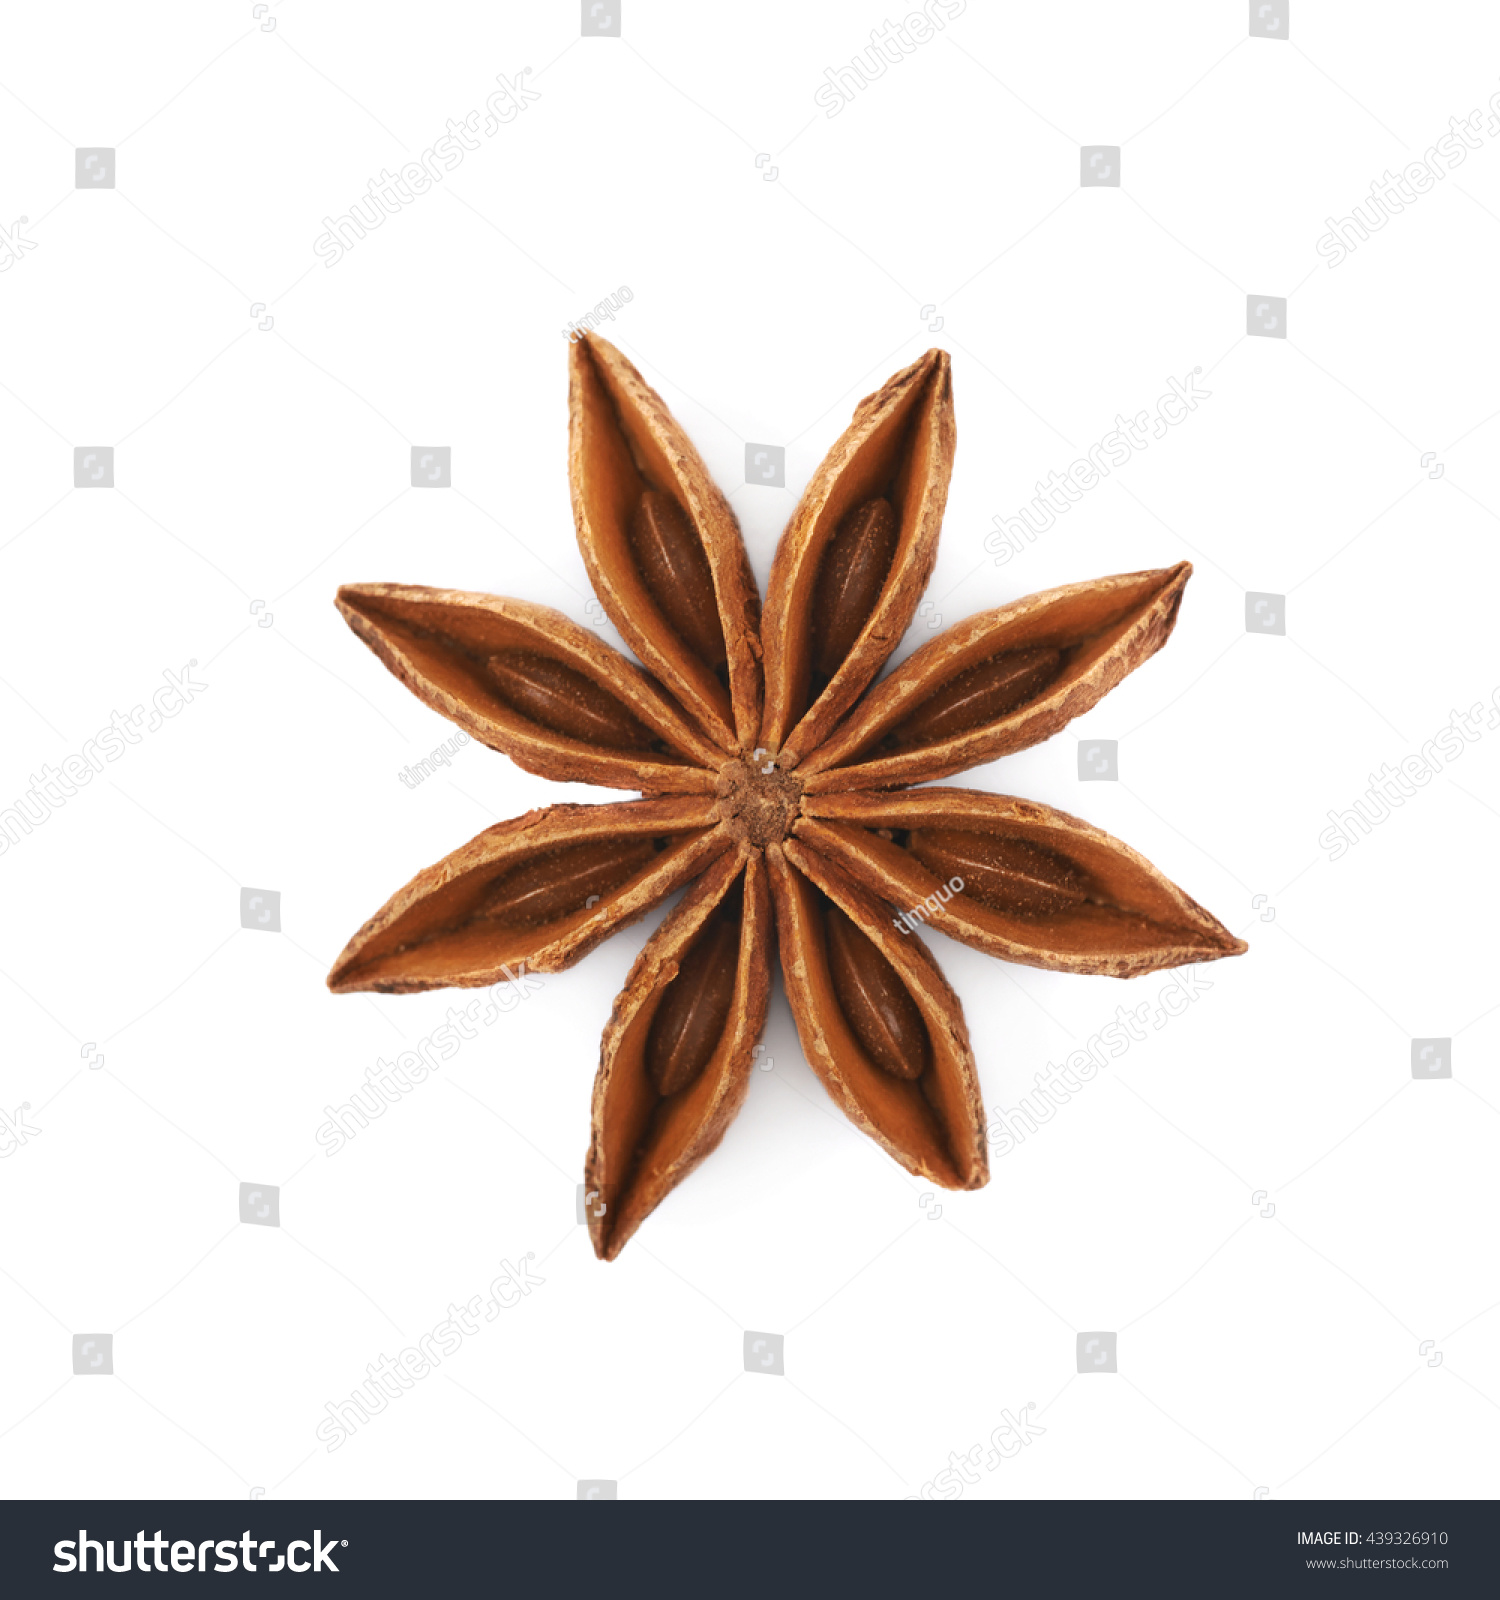 Single Chinese star anise seed isolated over the white background #439326910